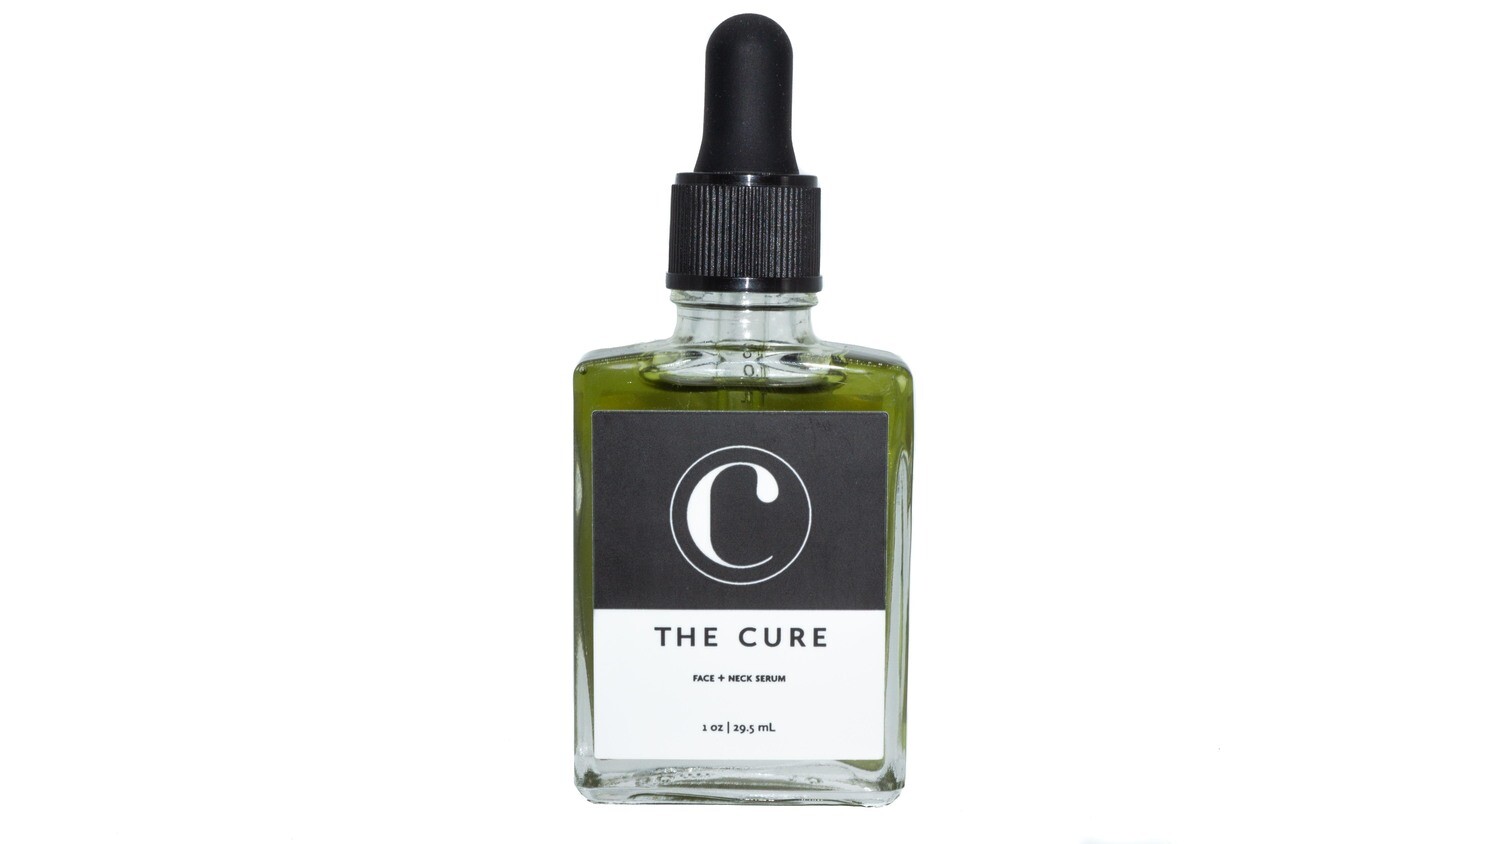 Face & Neck Serum by The Cure